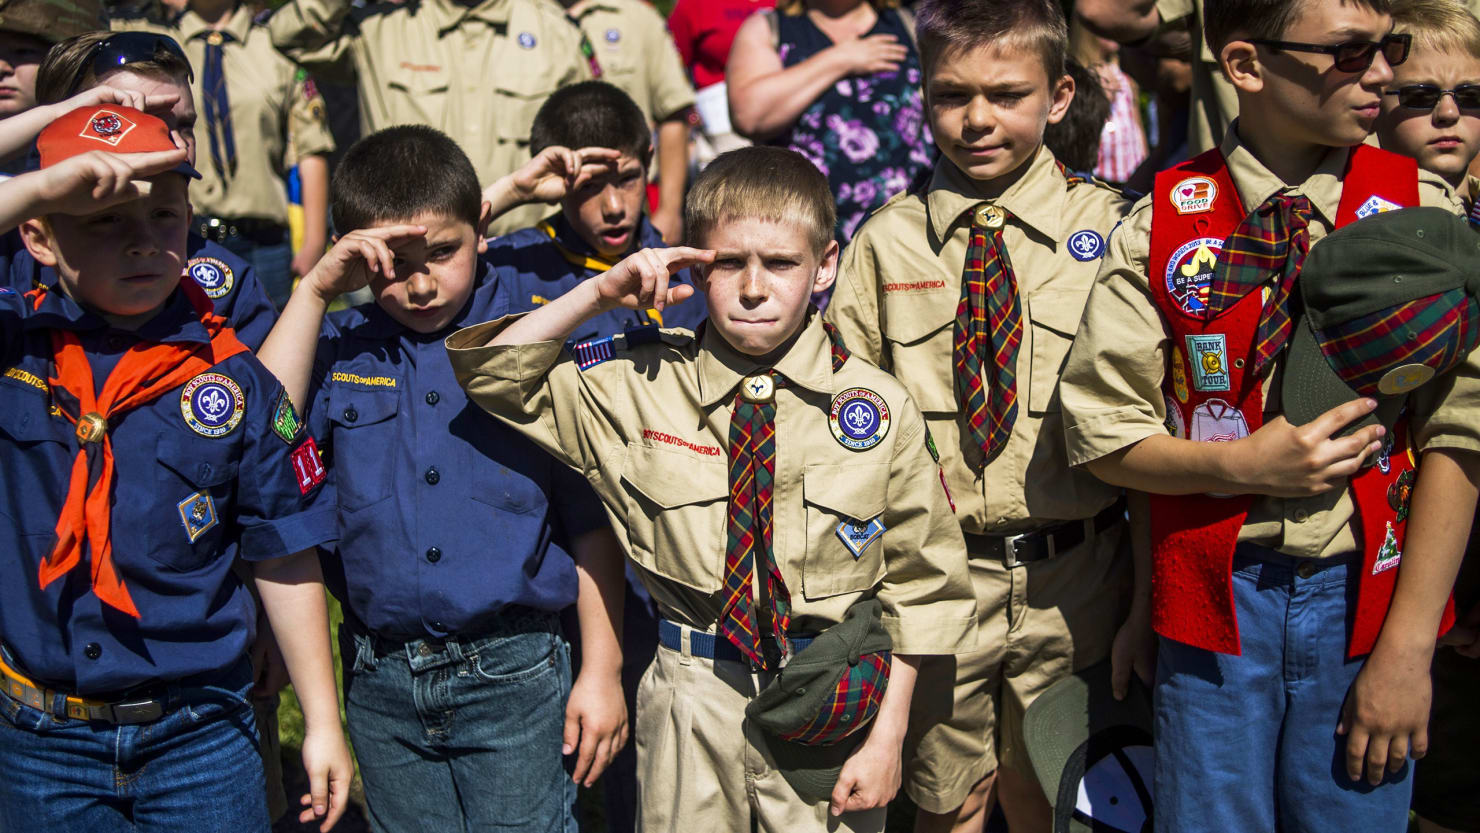 Cub Scout Booted From Den for Asking Lawmaker About Past Racist Comments